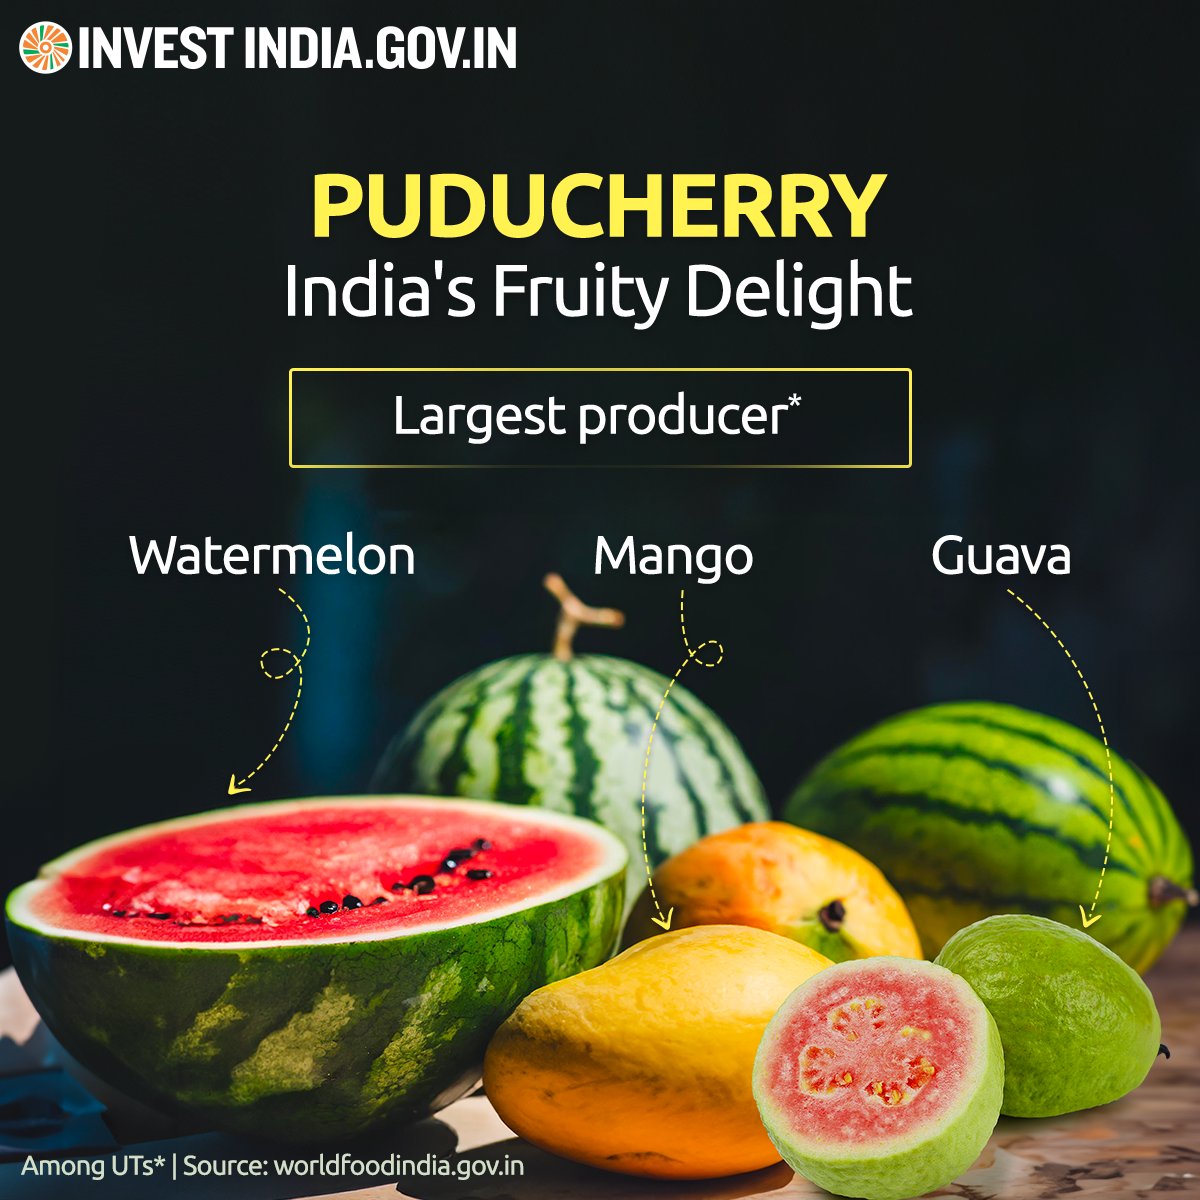 #Puducherry is home to 68 thriving #foodprocessing units and 3 #coldstorage facilities, enhancing efficiency and ensuring optimal preservation capacity for the region's agricultural produce.

Know more: bit.ly/II-Puducherry

#InvestInIndia #InvestInPuducherry @Taiwan_Today